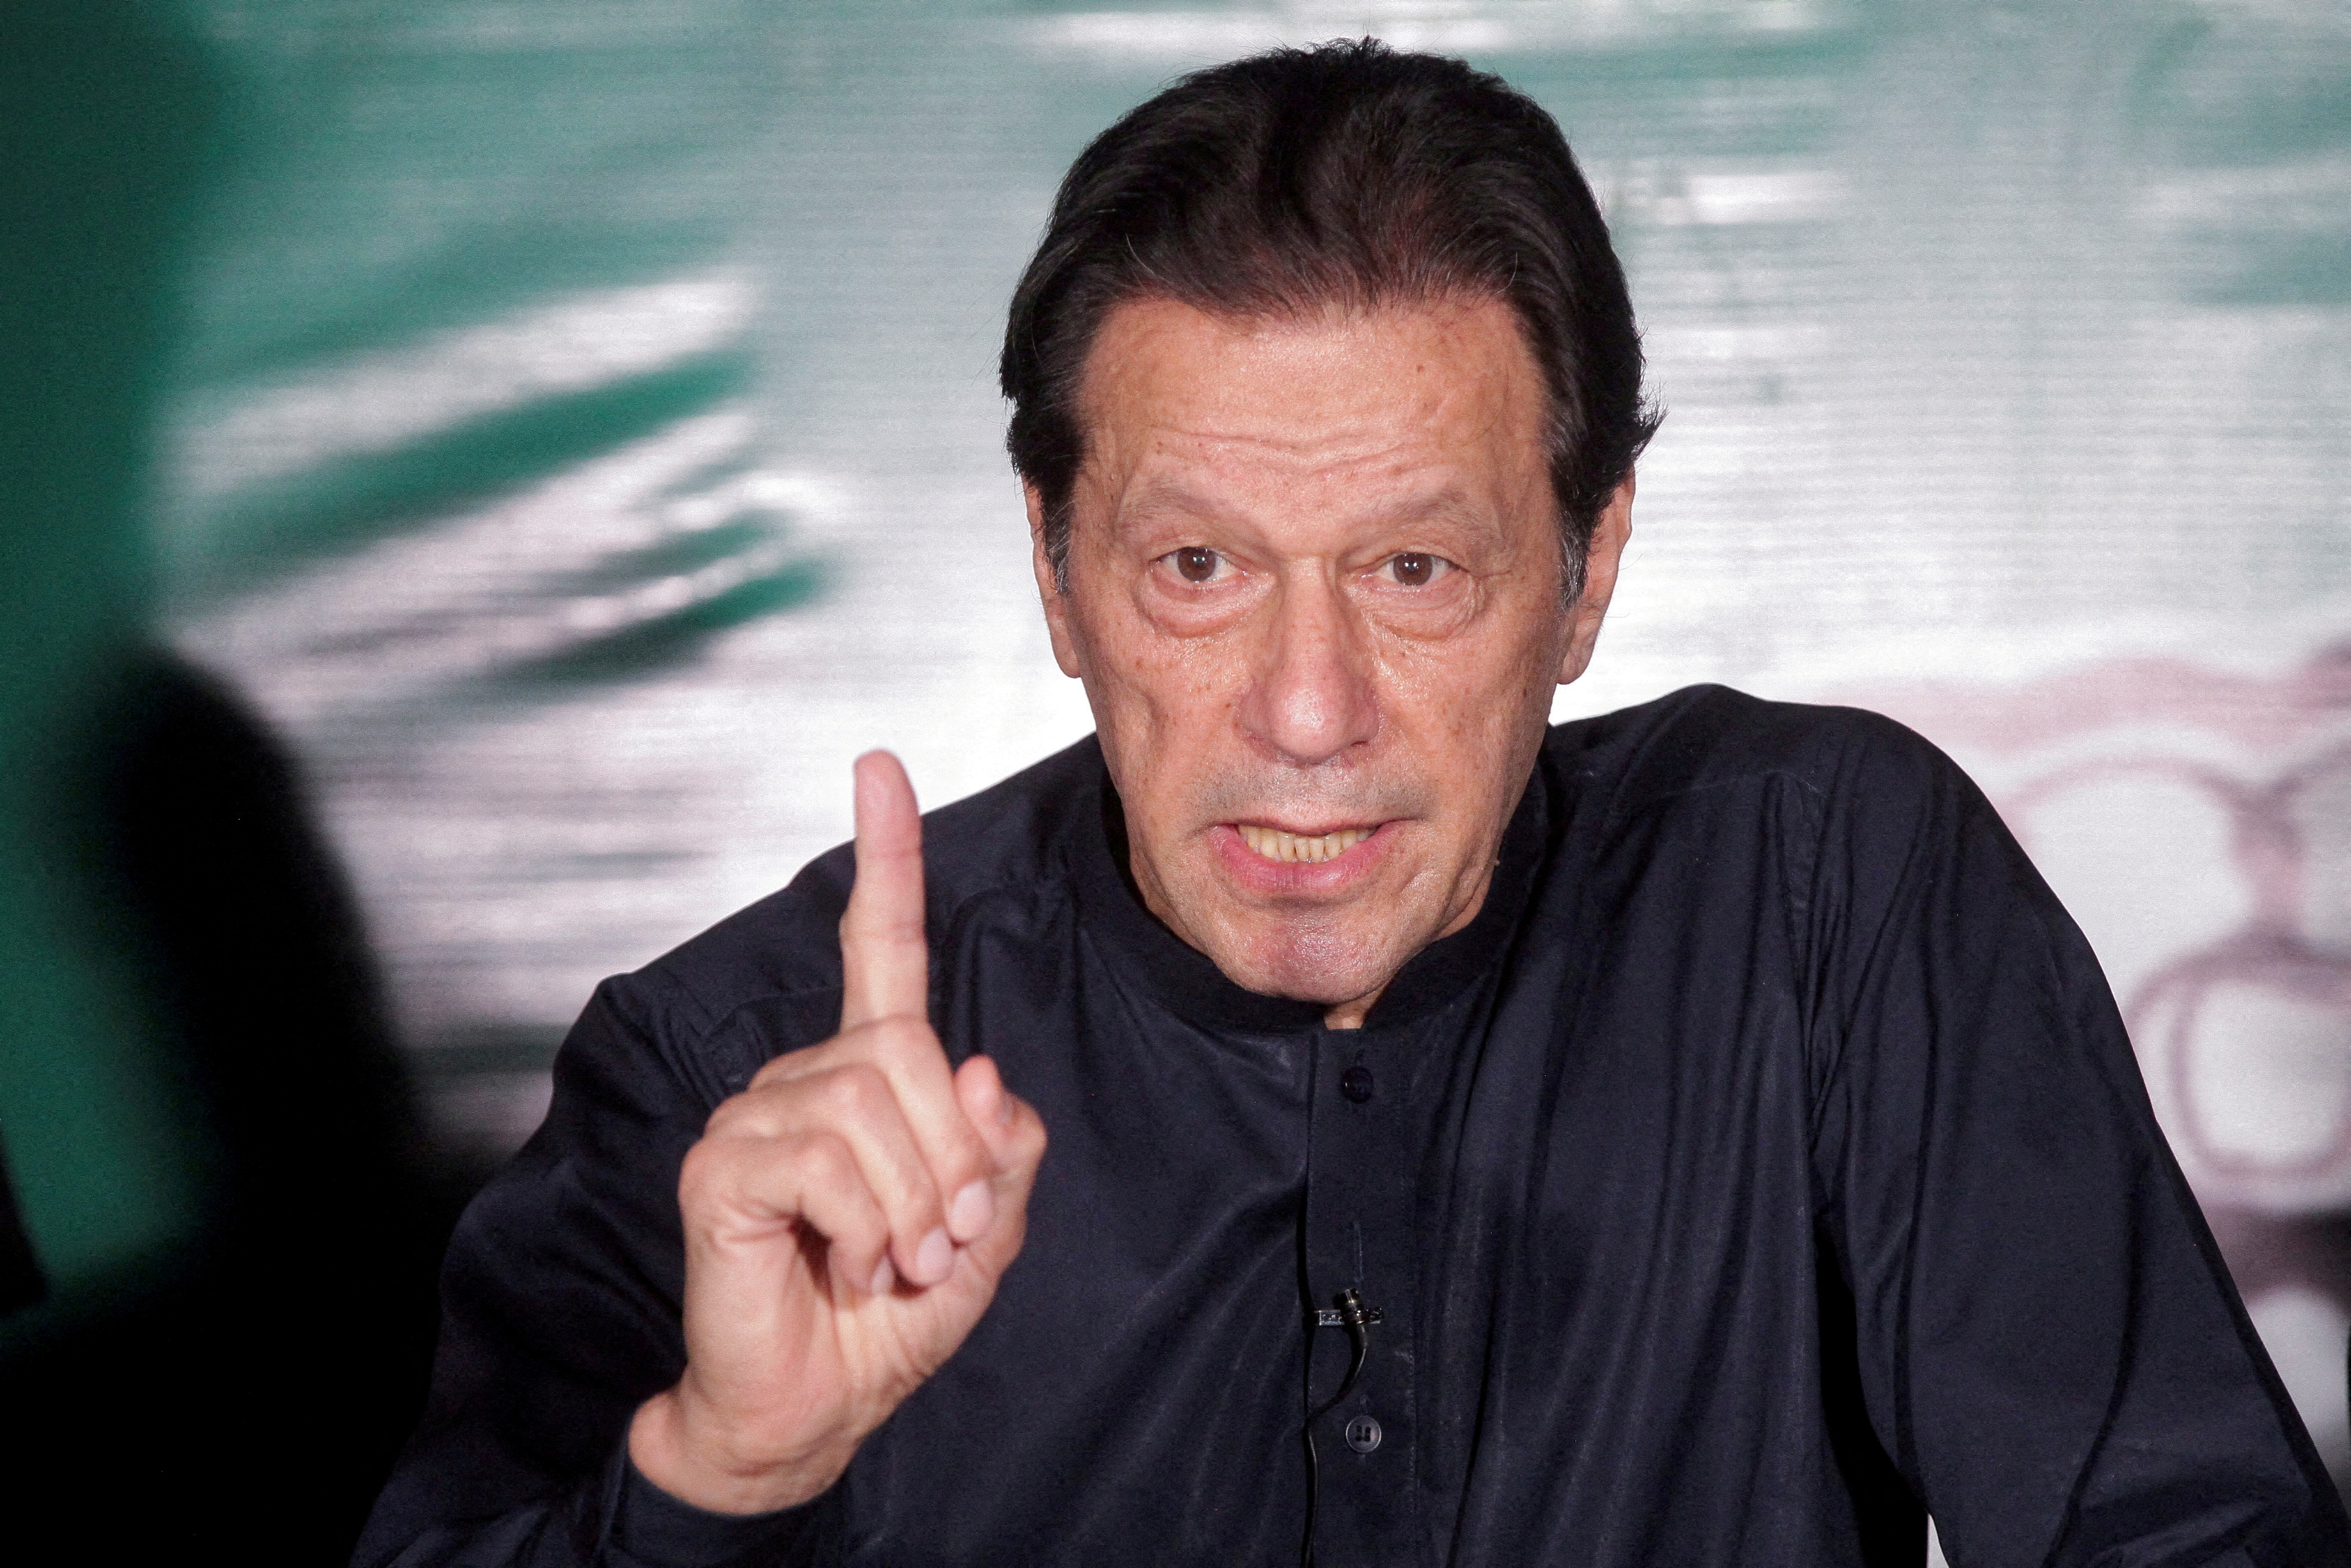 Pakistan's former Prime Minister Imran Khan gestures as he speaks to the members of the media at his residence in Lahore